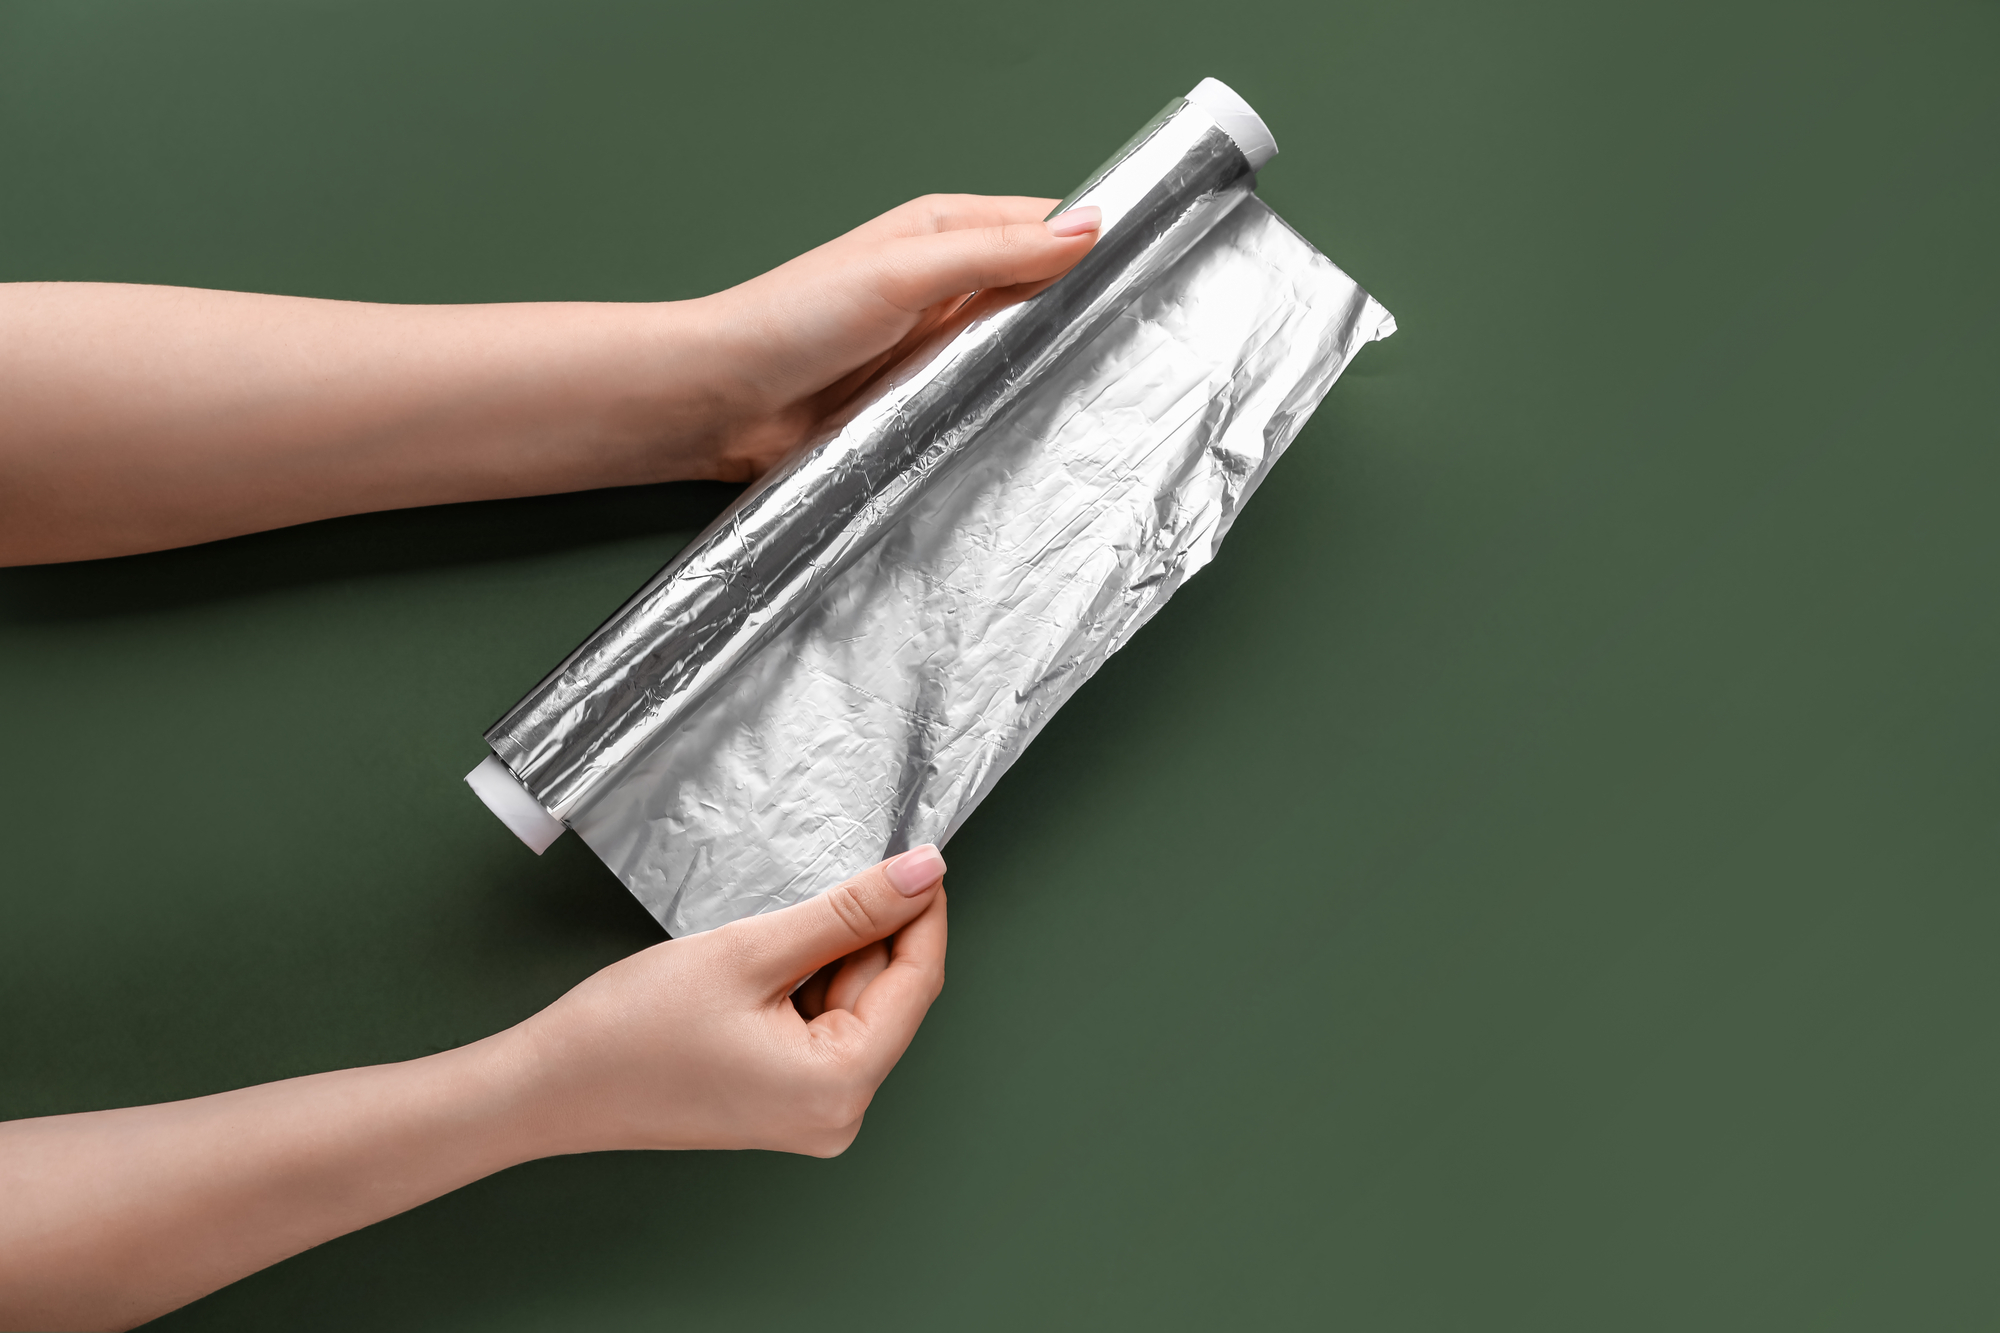 12 Aluminum Foil Hacks Your Mom Might Not Have Shared With You